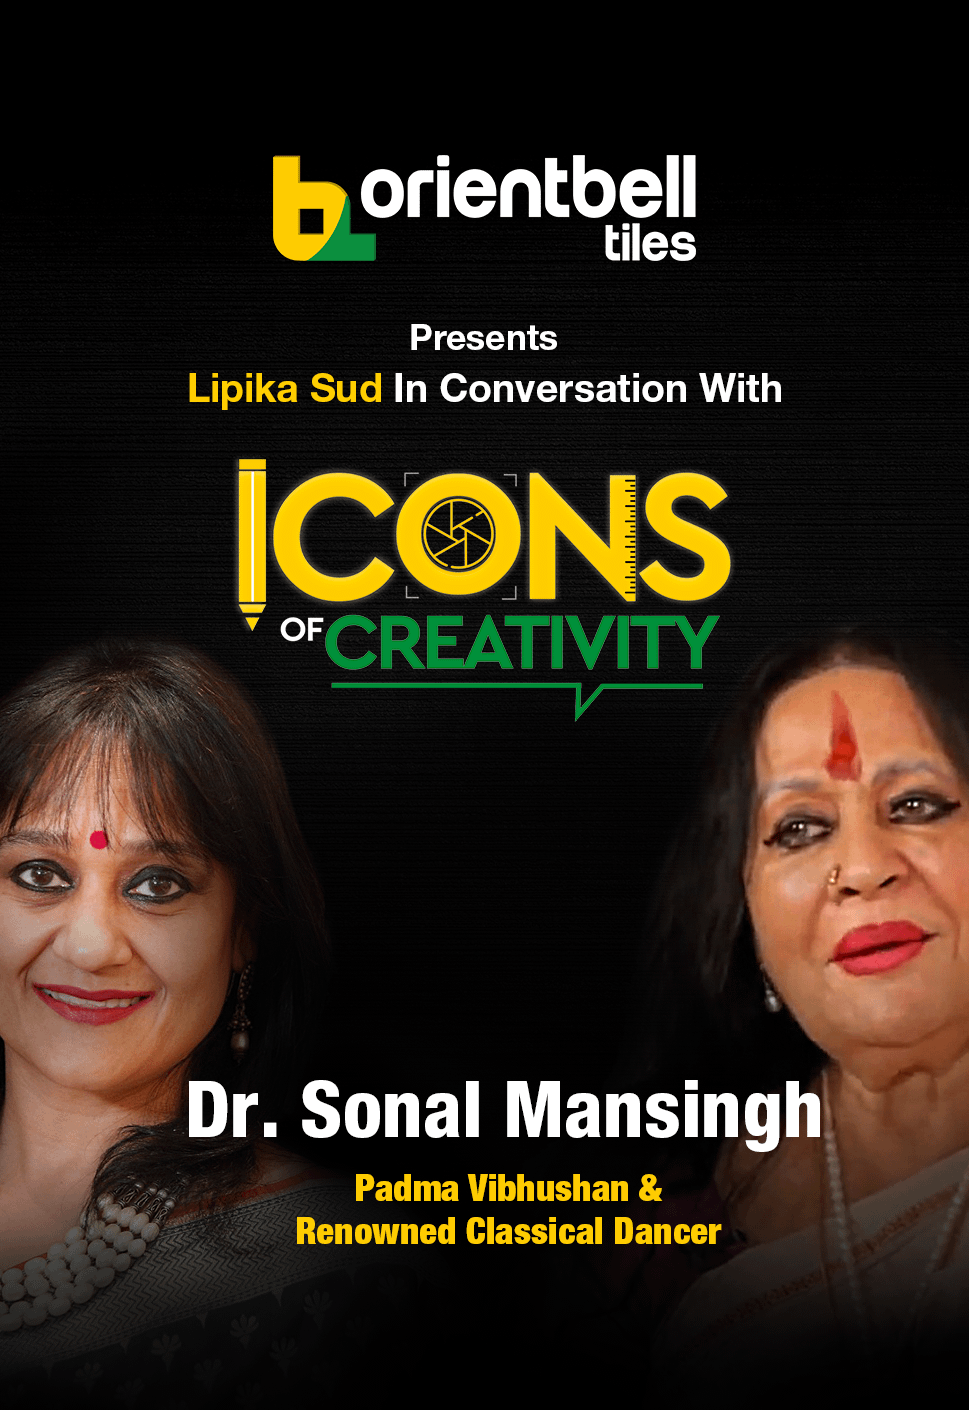 Dancing through life, and more, with Dr. Sonal Mansingh